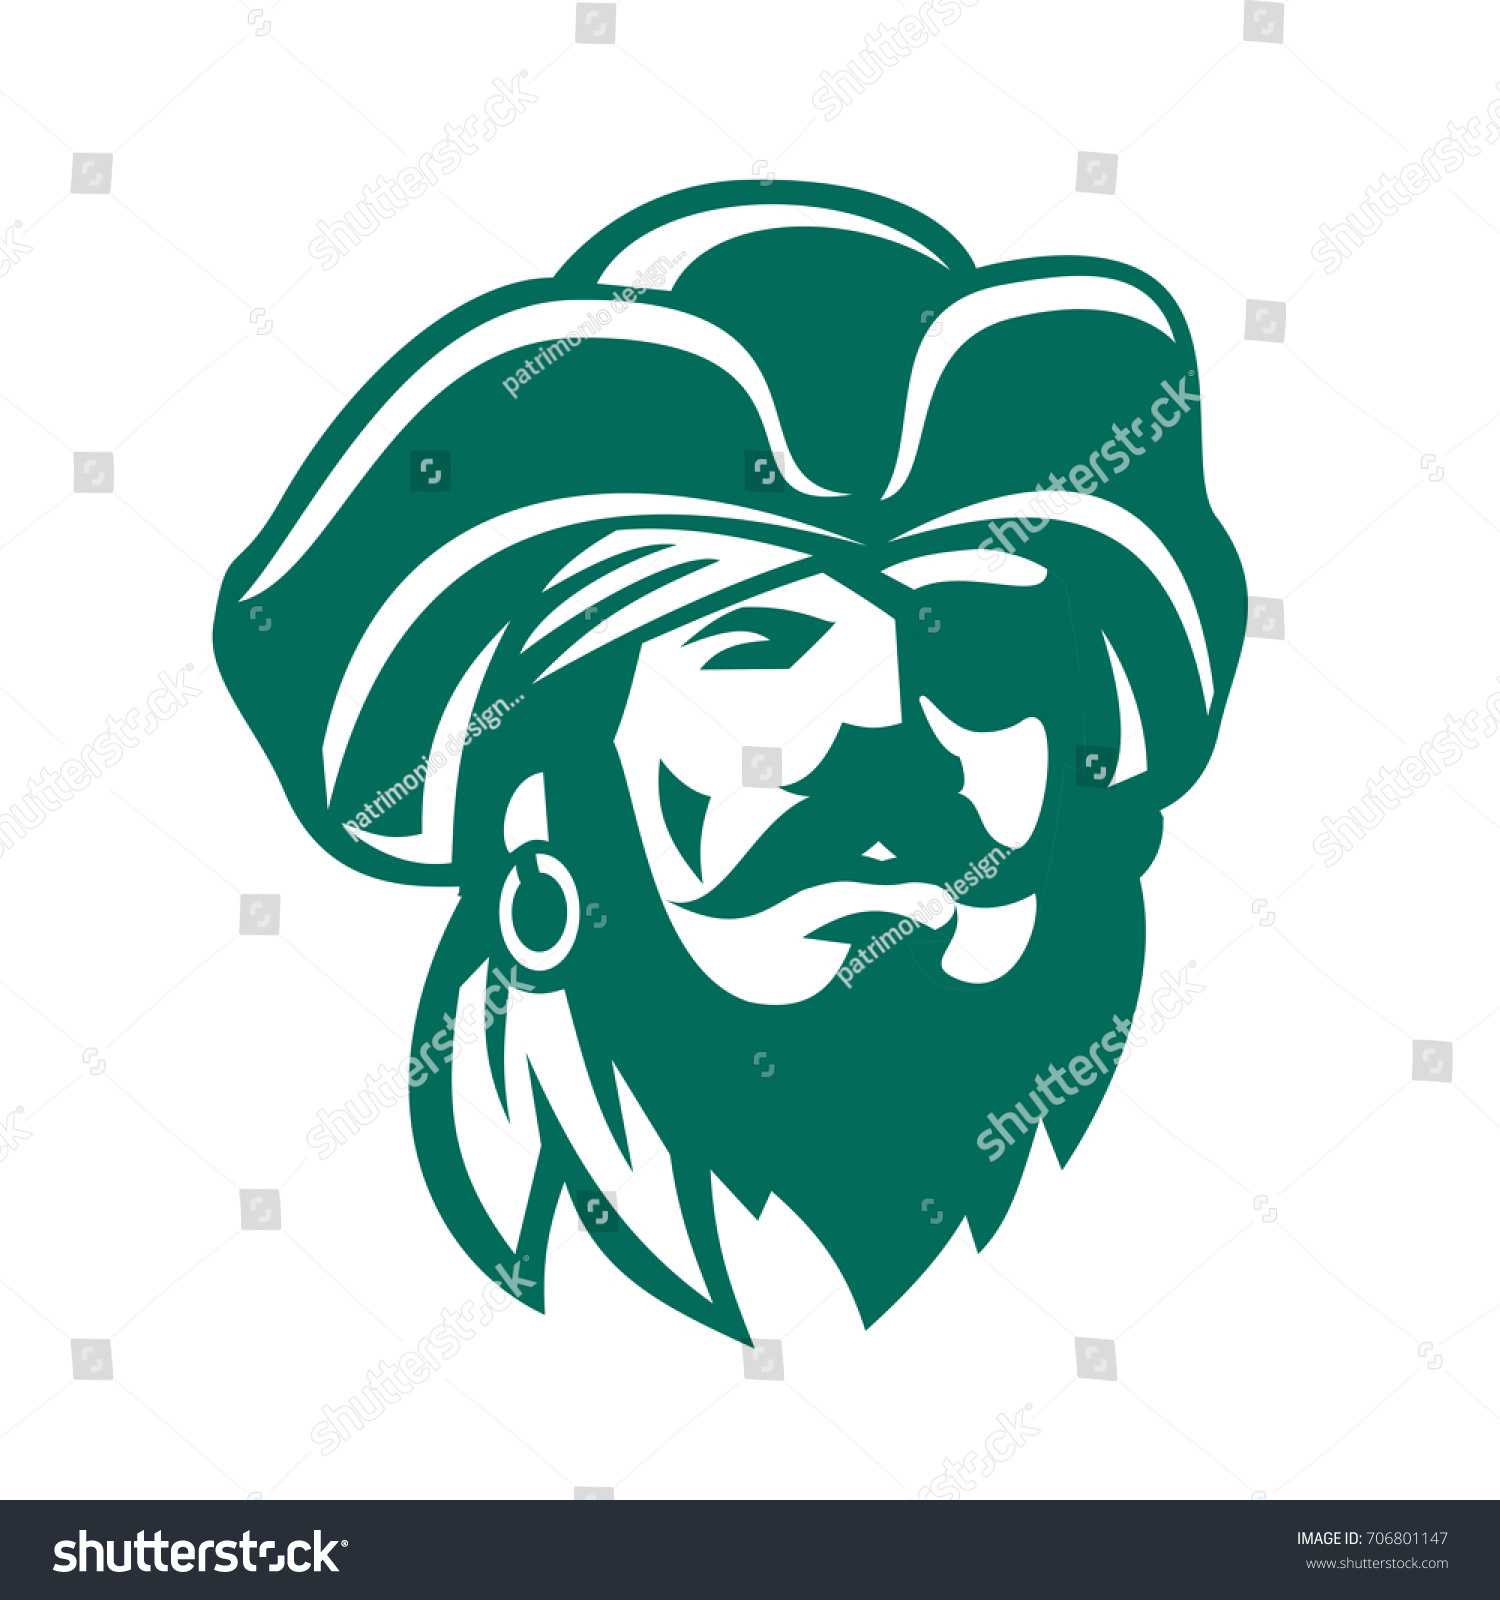 SVG of Retro style illustration of a pirate Buccaneer captain with beard and eye patch viewed from front on isolated background. svg